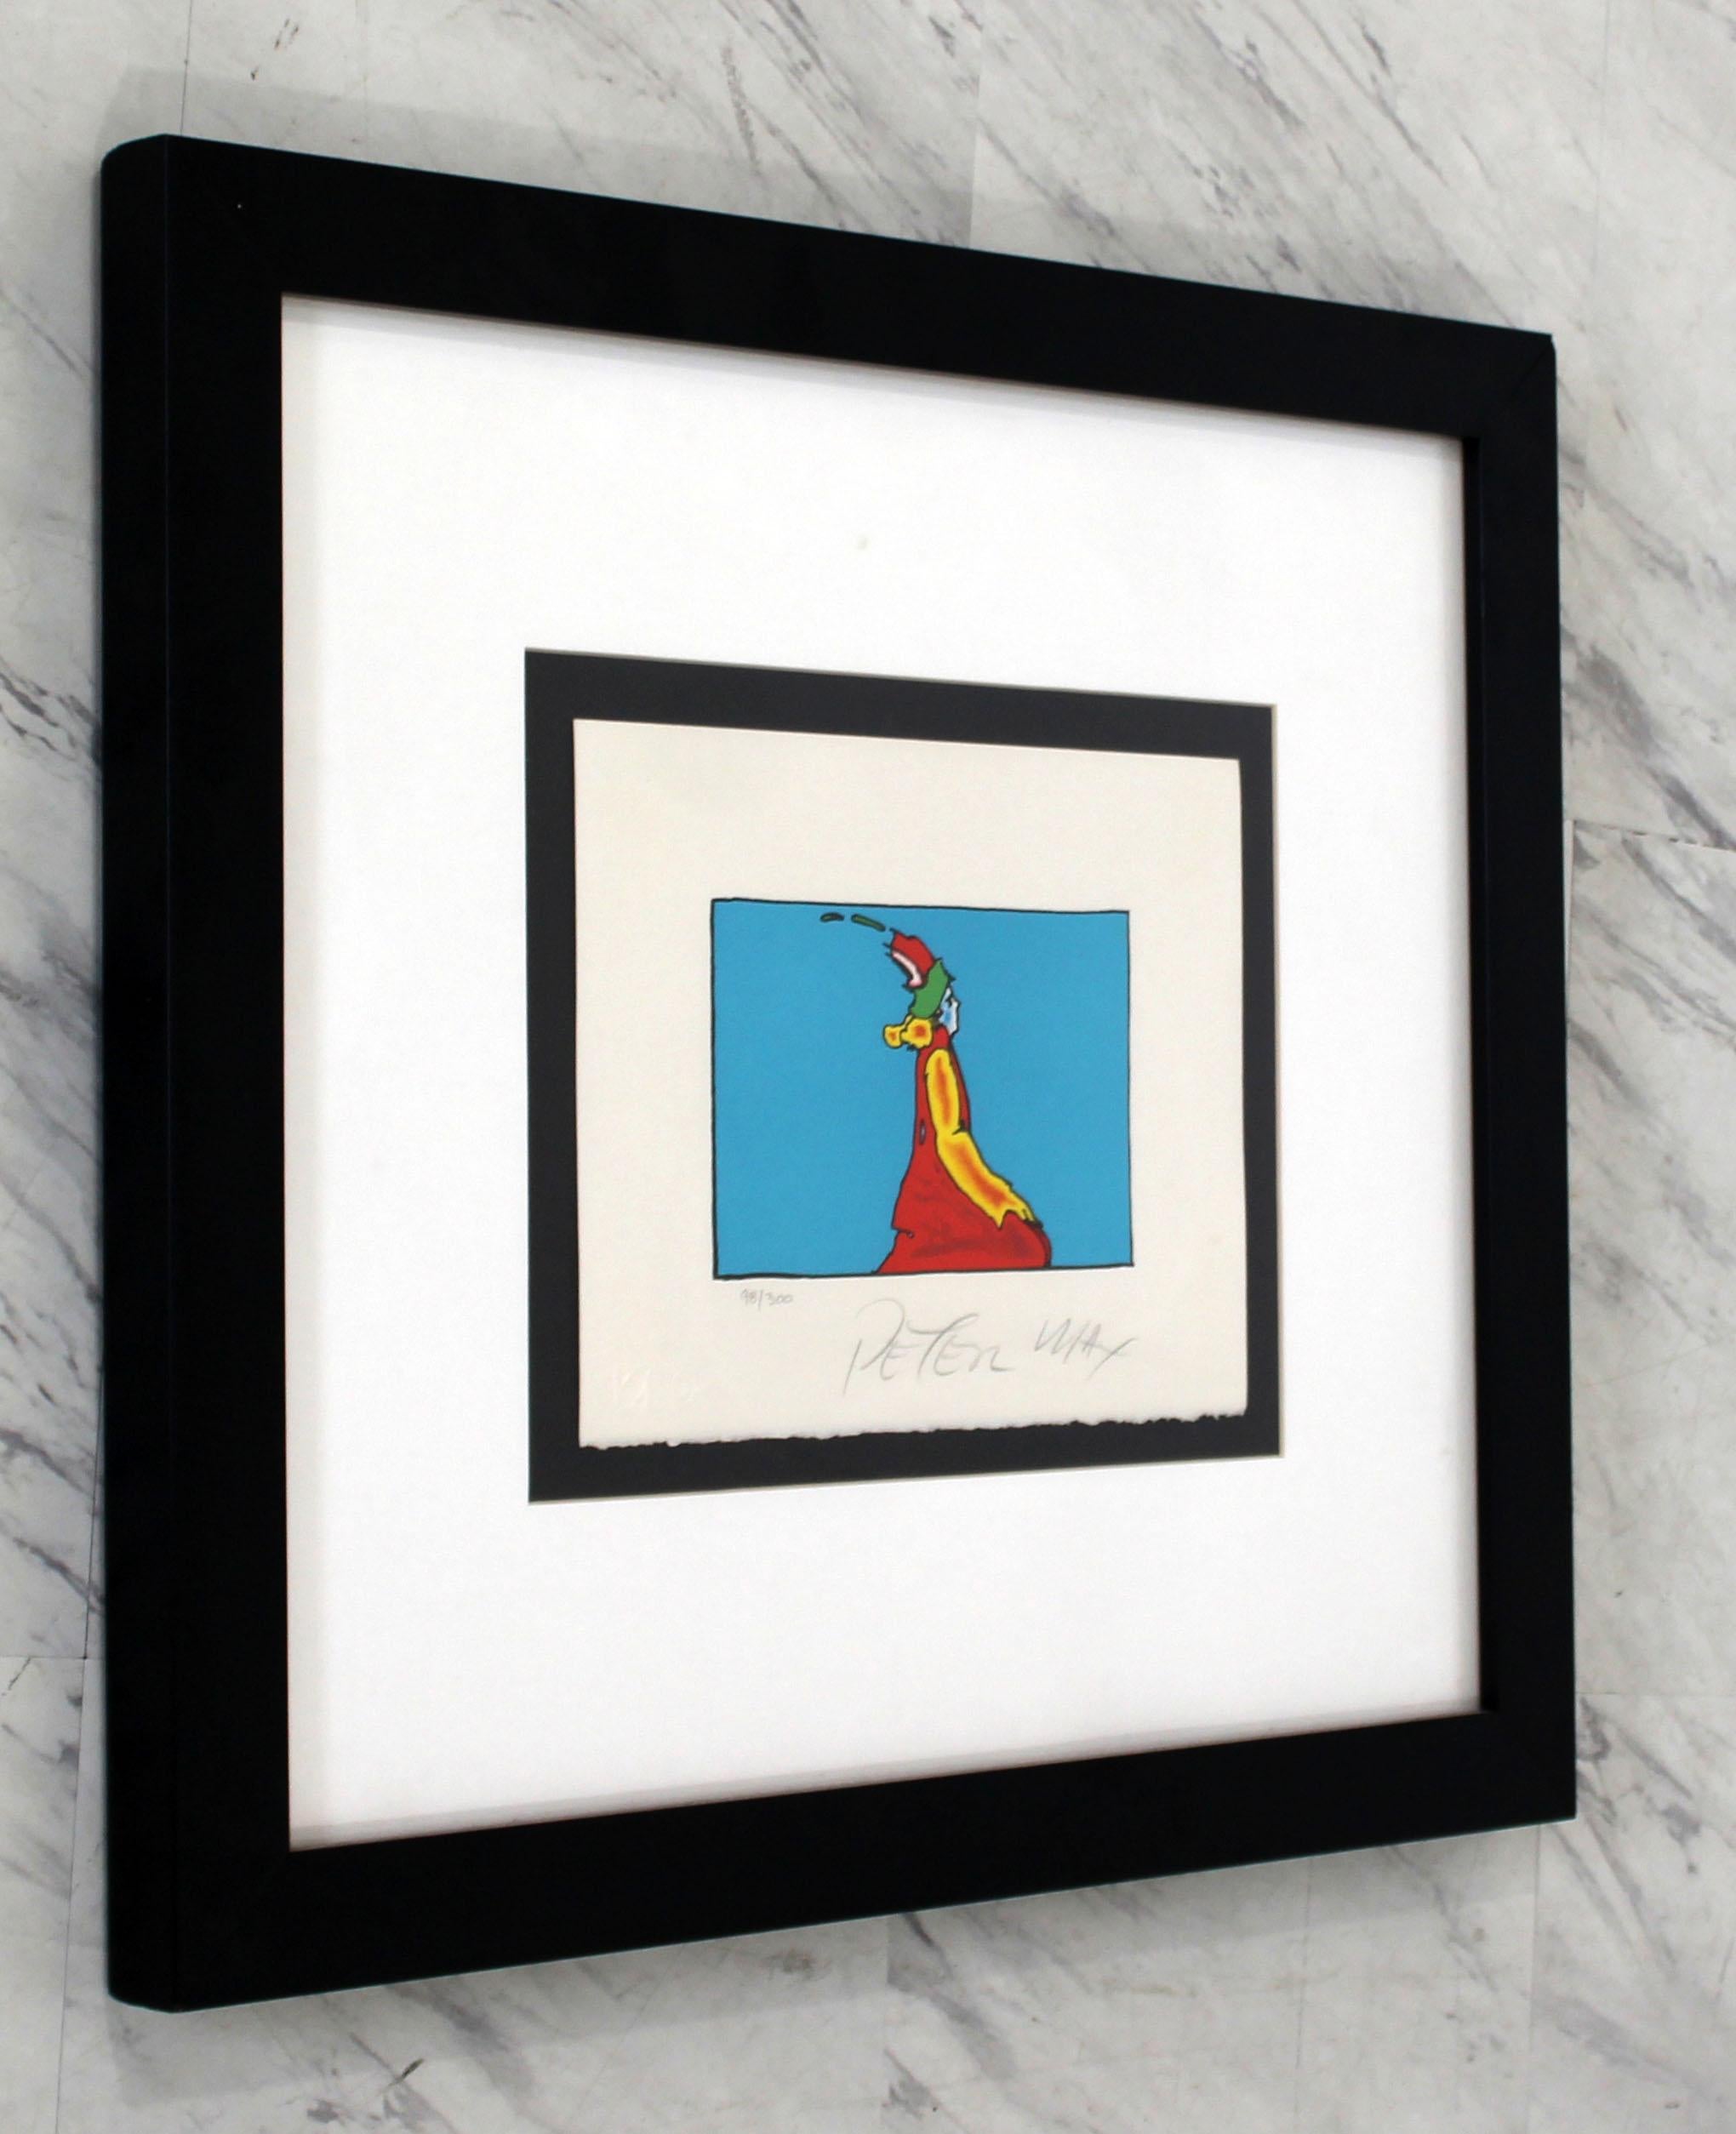 American Mid-Century Modern Framed Peter Max Lithograph Signed 98/300 